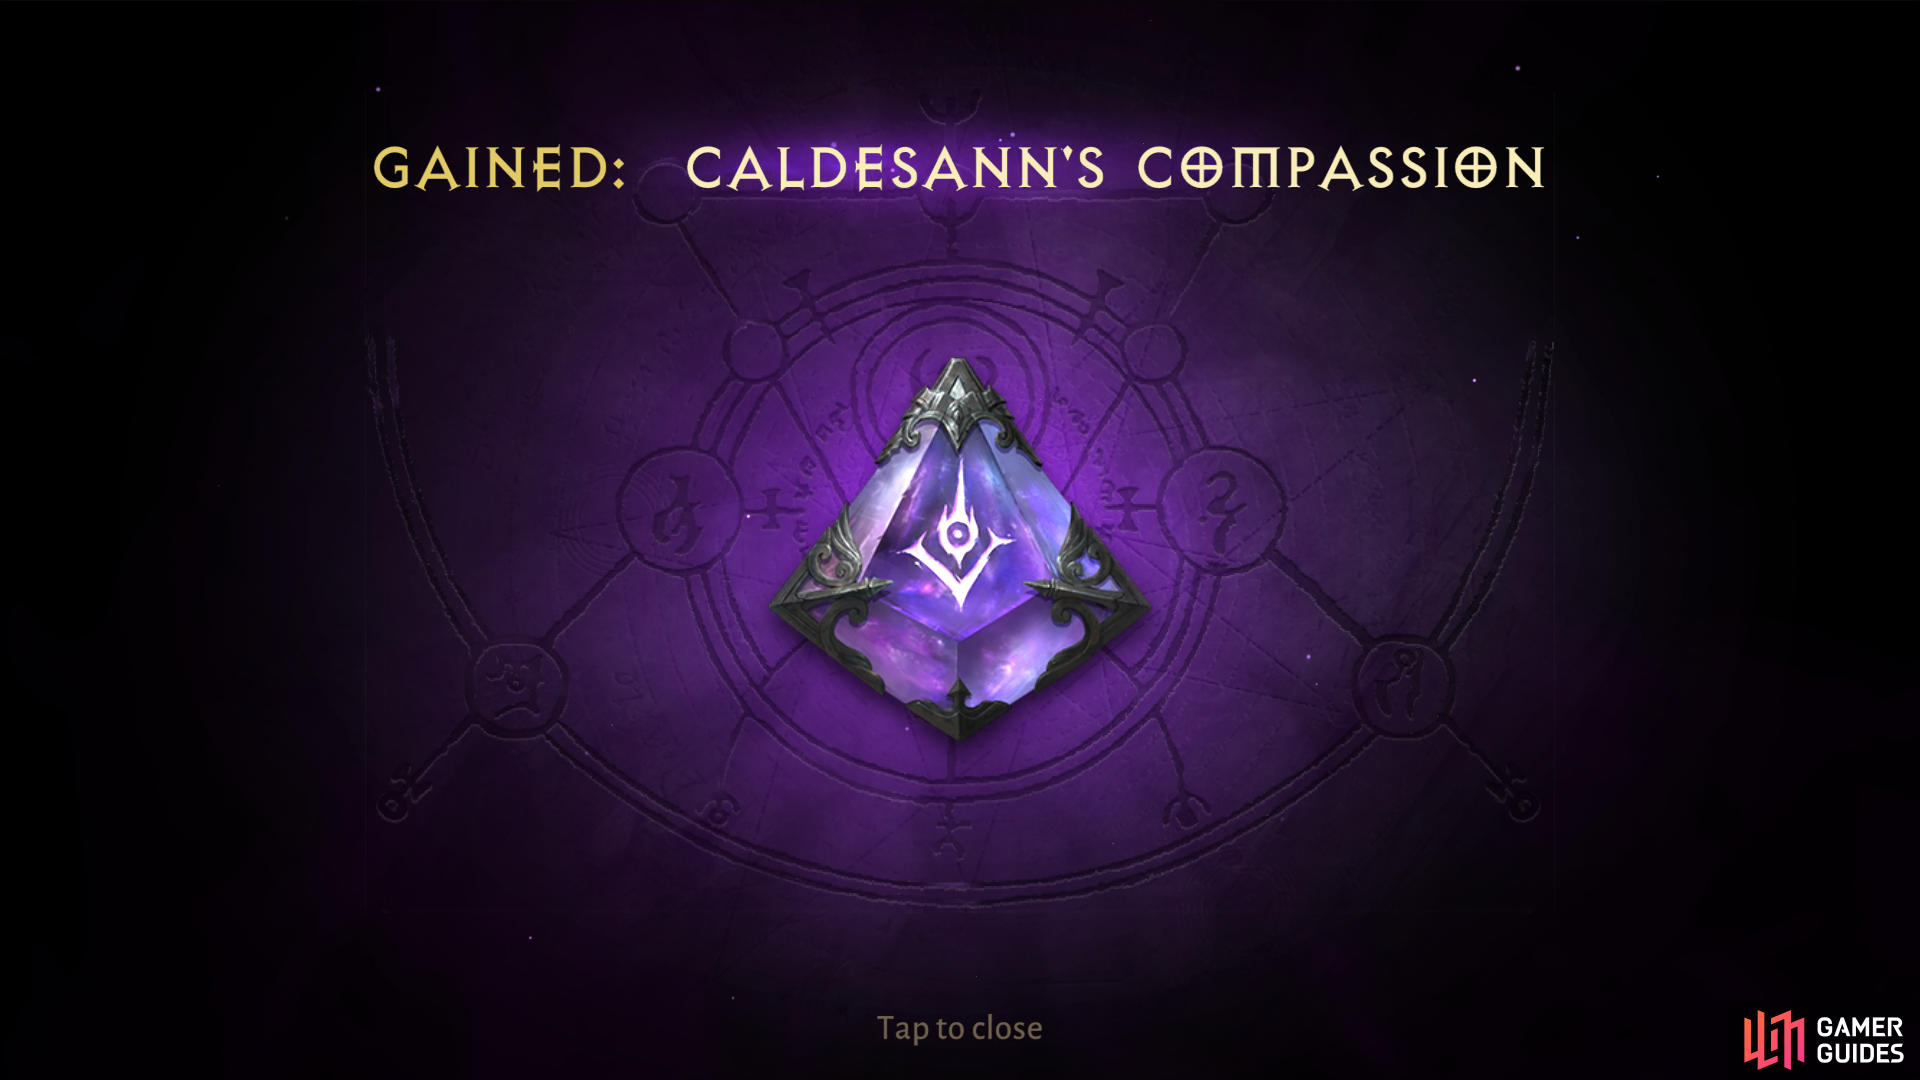 Caldesann's Compassion will be acquired after finishing the 10th level of the Challenge Rift.